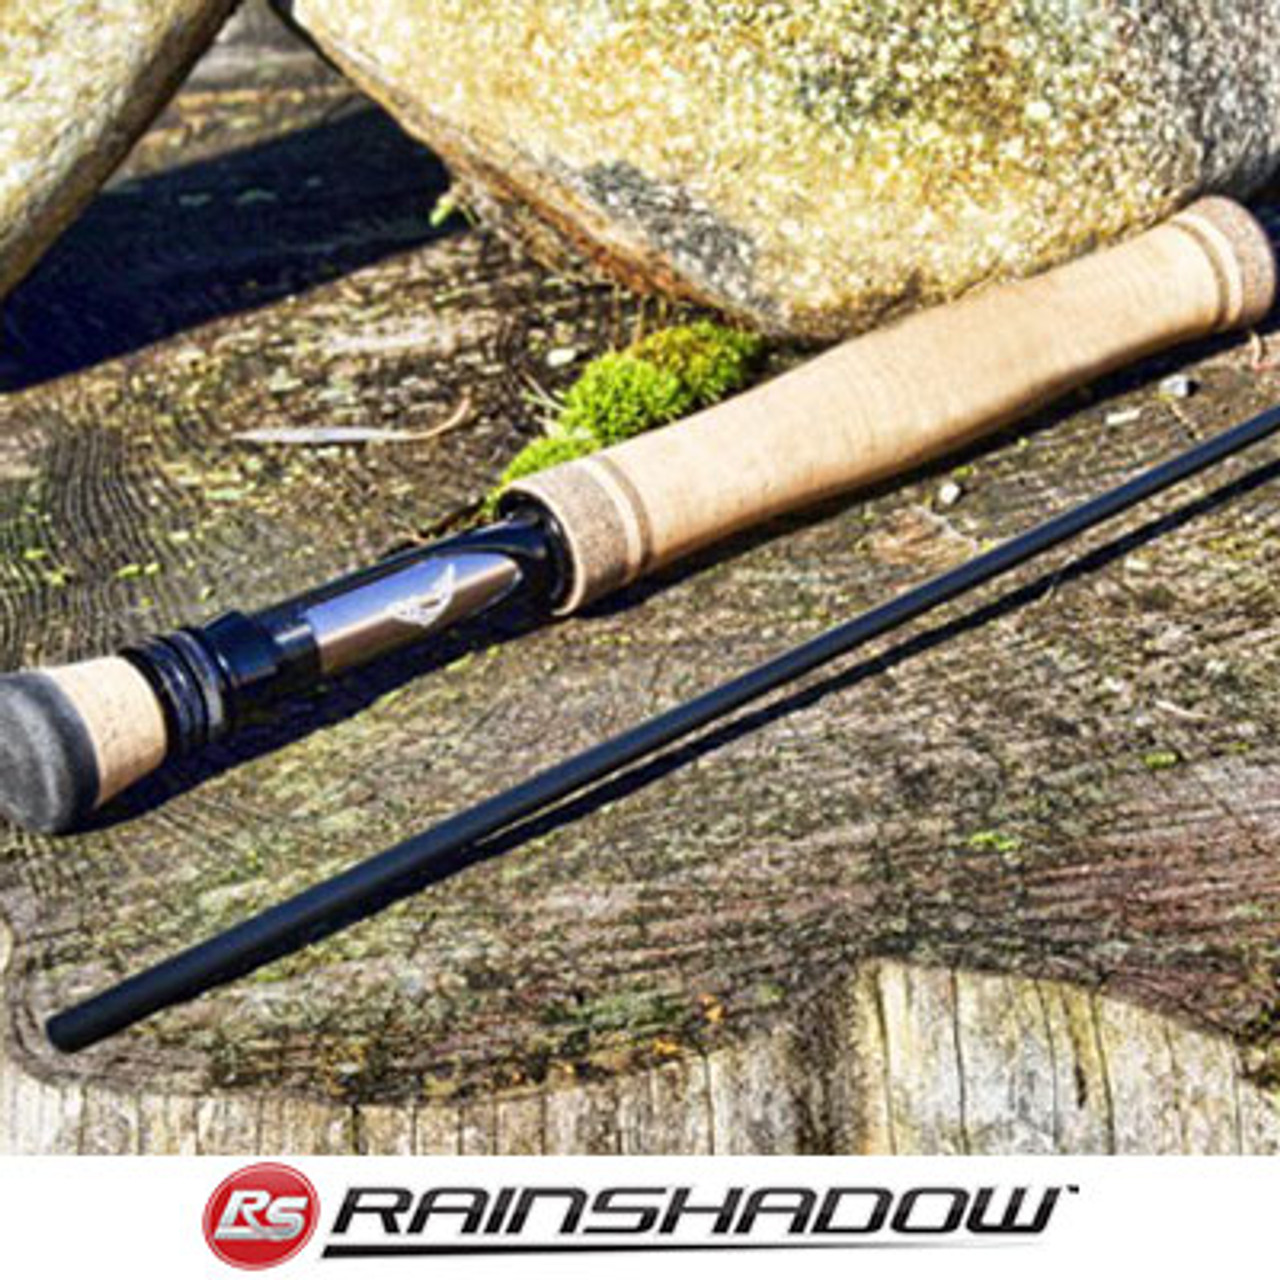 Always ready, with the Phenix Rods Redeye.⁠ You never really know